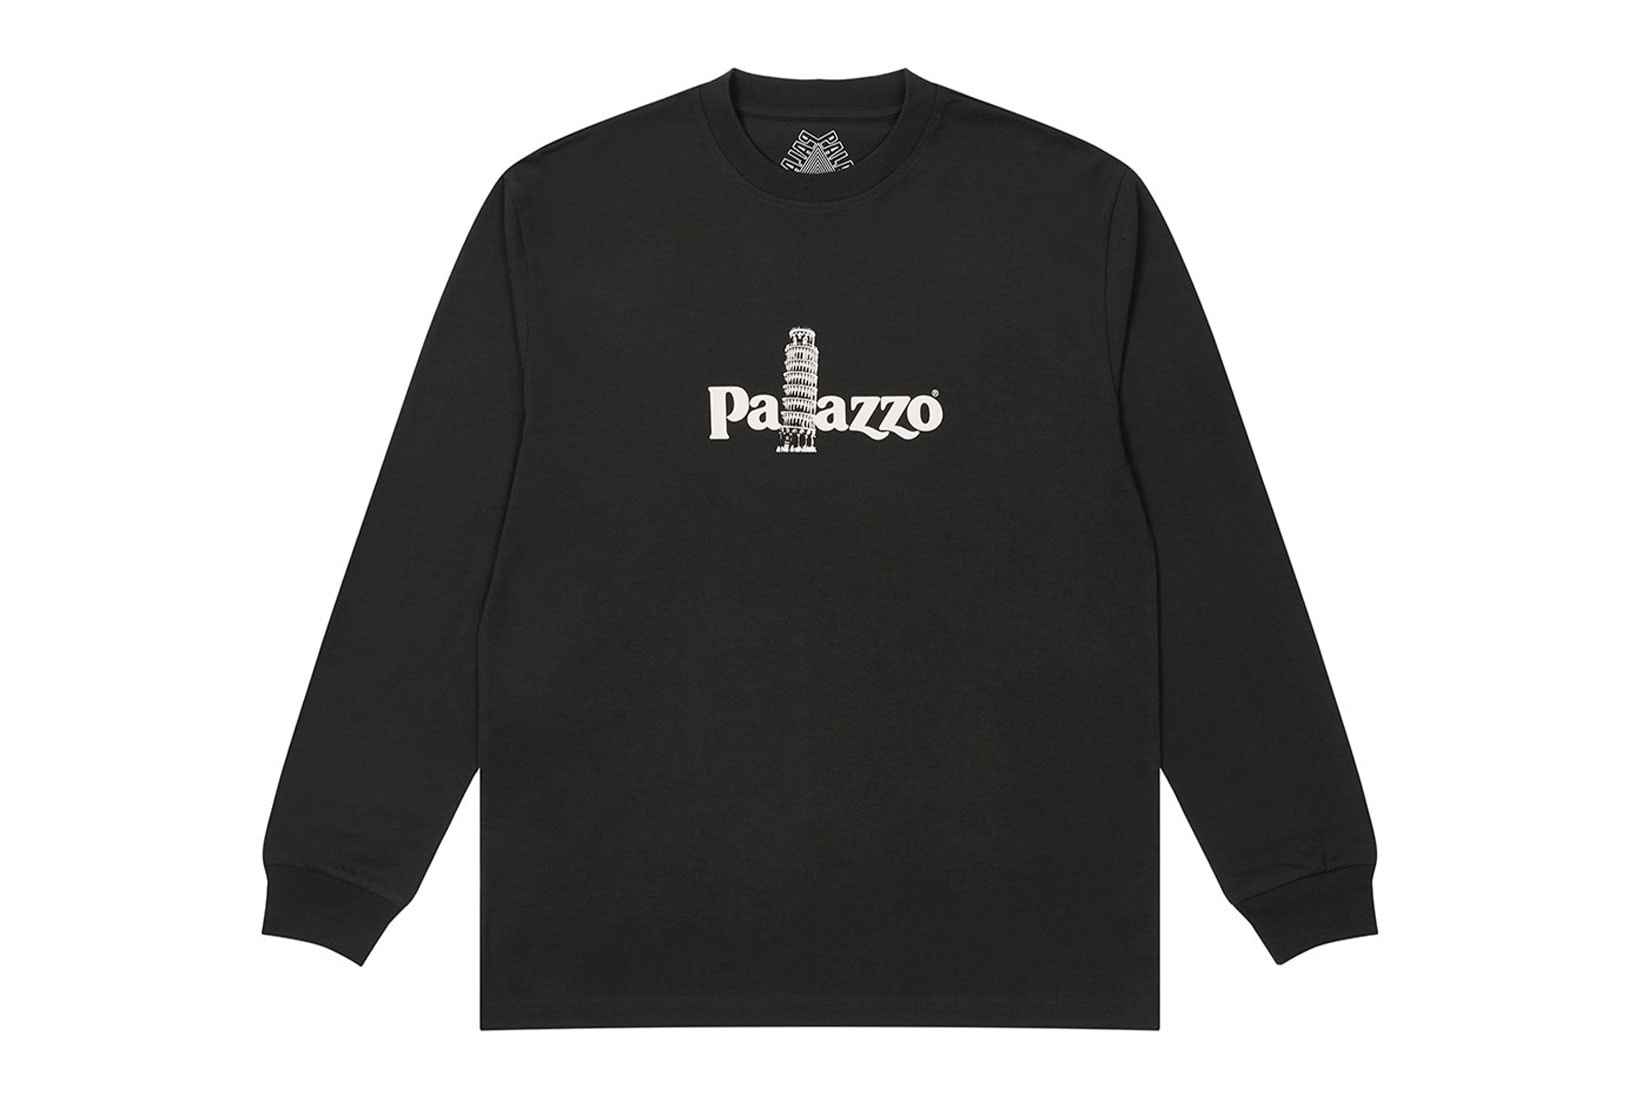 palace spring drop 4 collection sweatshirt palazzo leaning tower of pisa